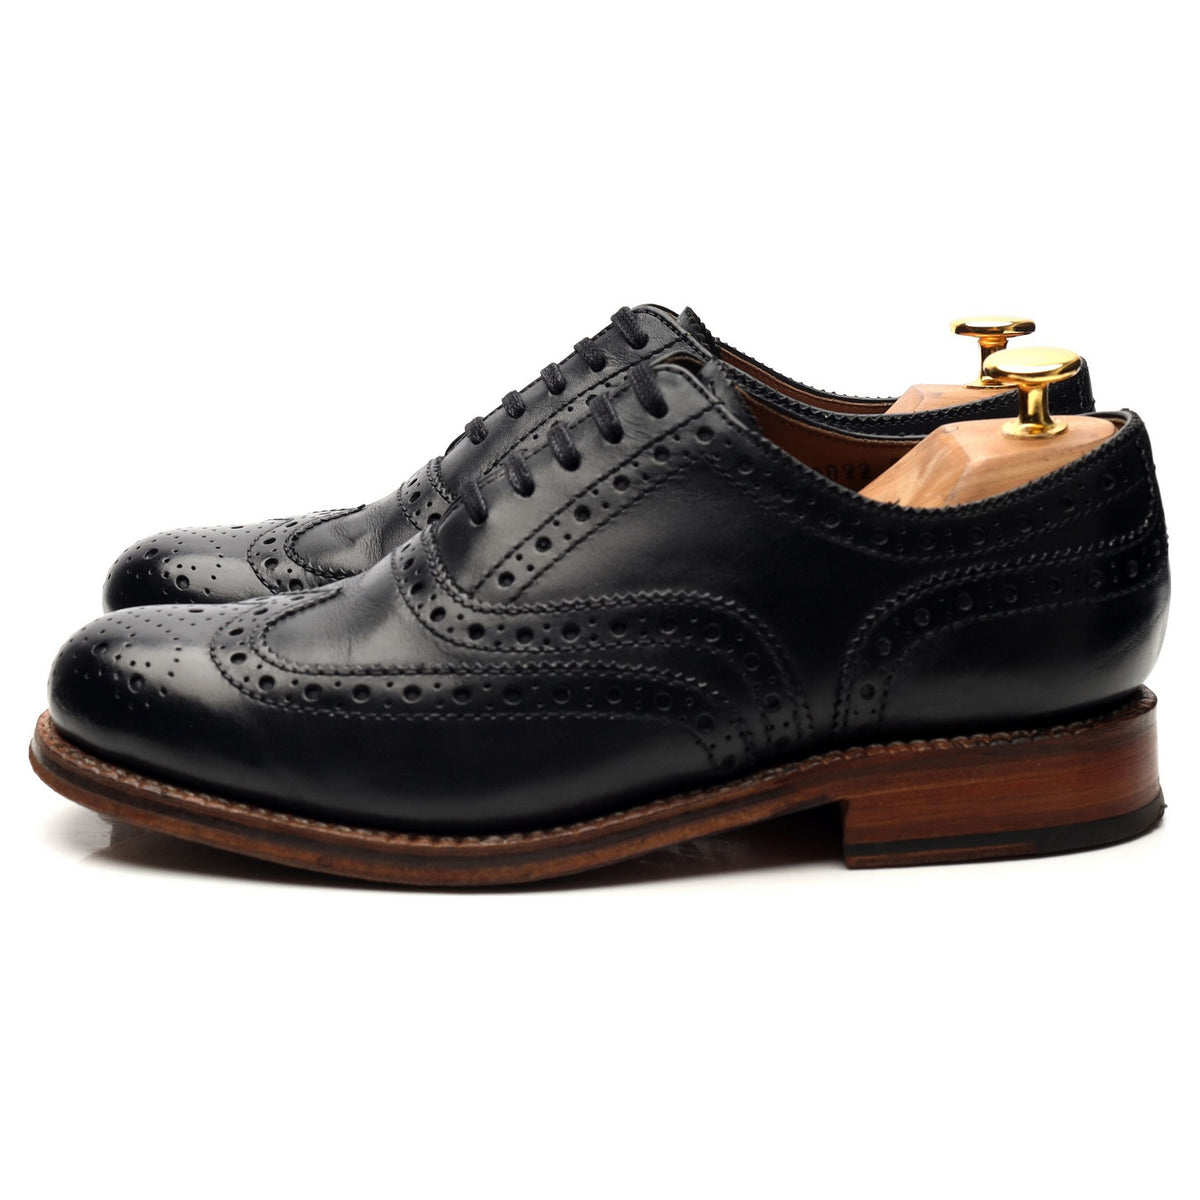 &#39;Angus&#39; Black Leather Oxford Brogues UK 5 G